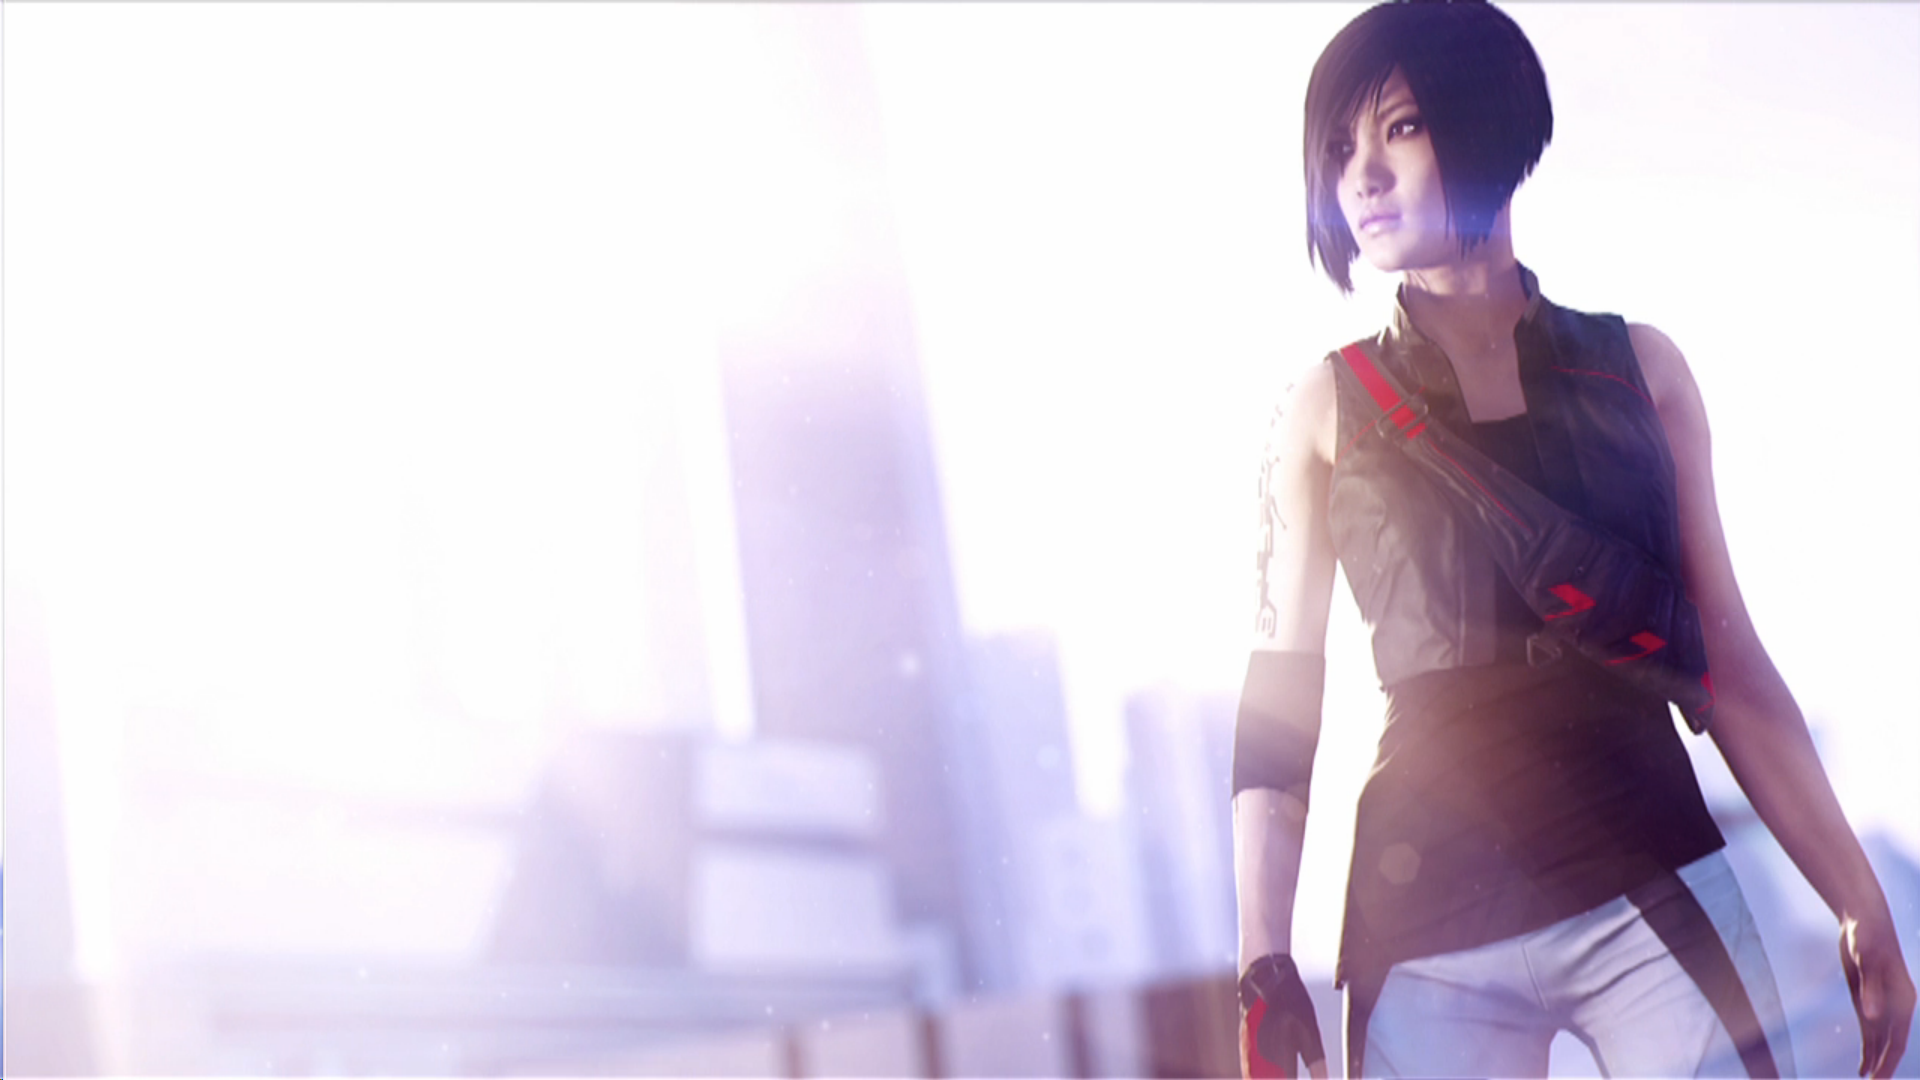 Mirror's Edge Catalyst was released on this day 6 years ago! To